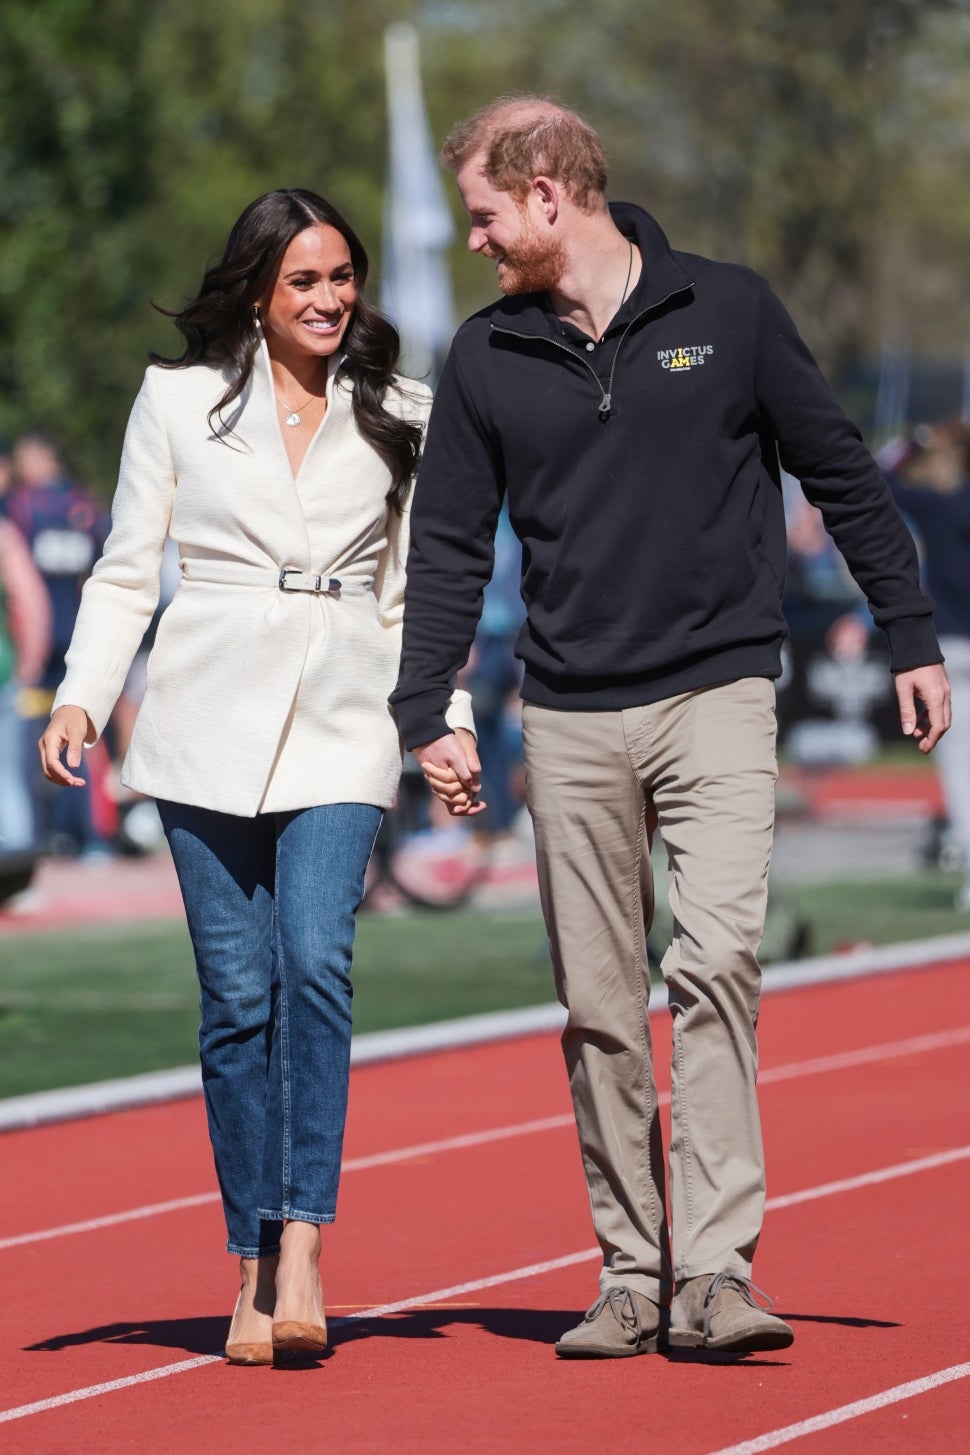 Prince Harry and Meghan Markle Invictus Games Day 2